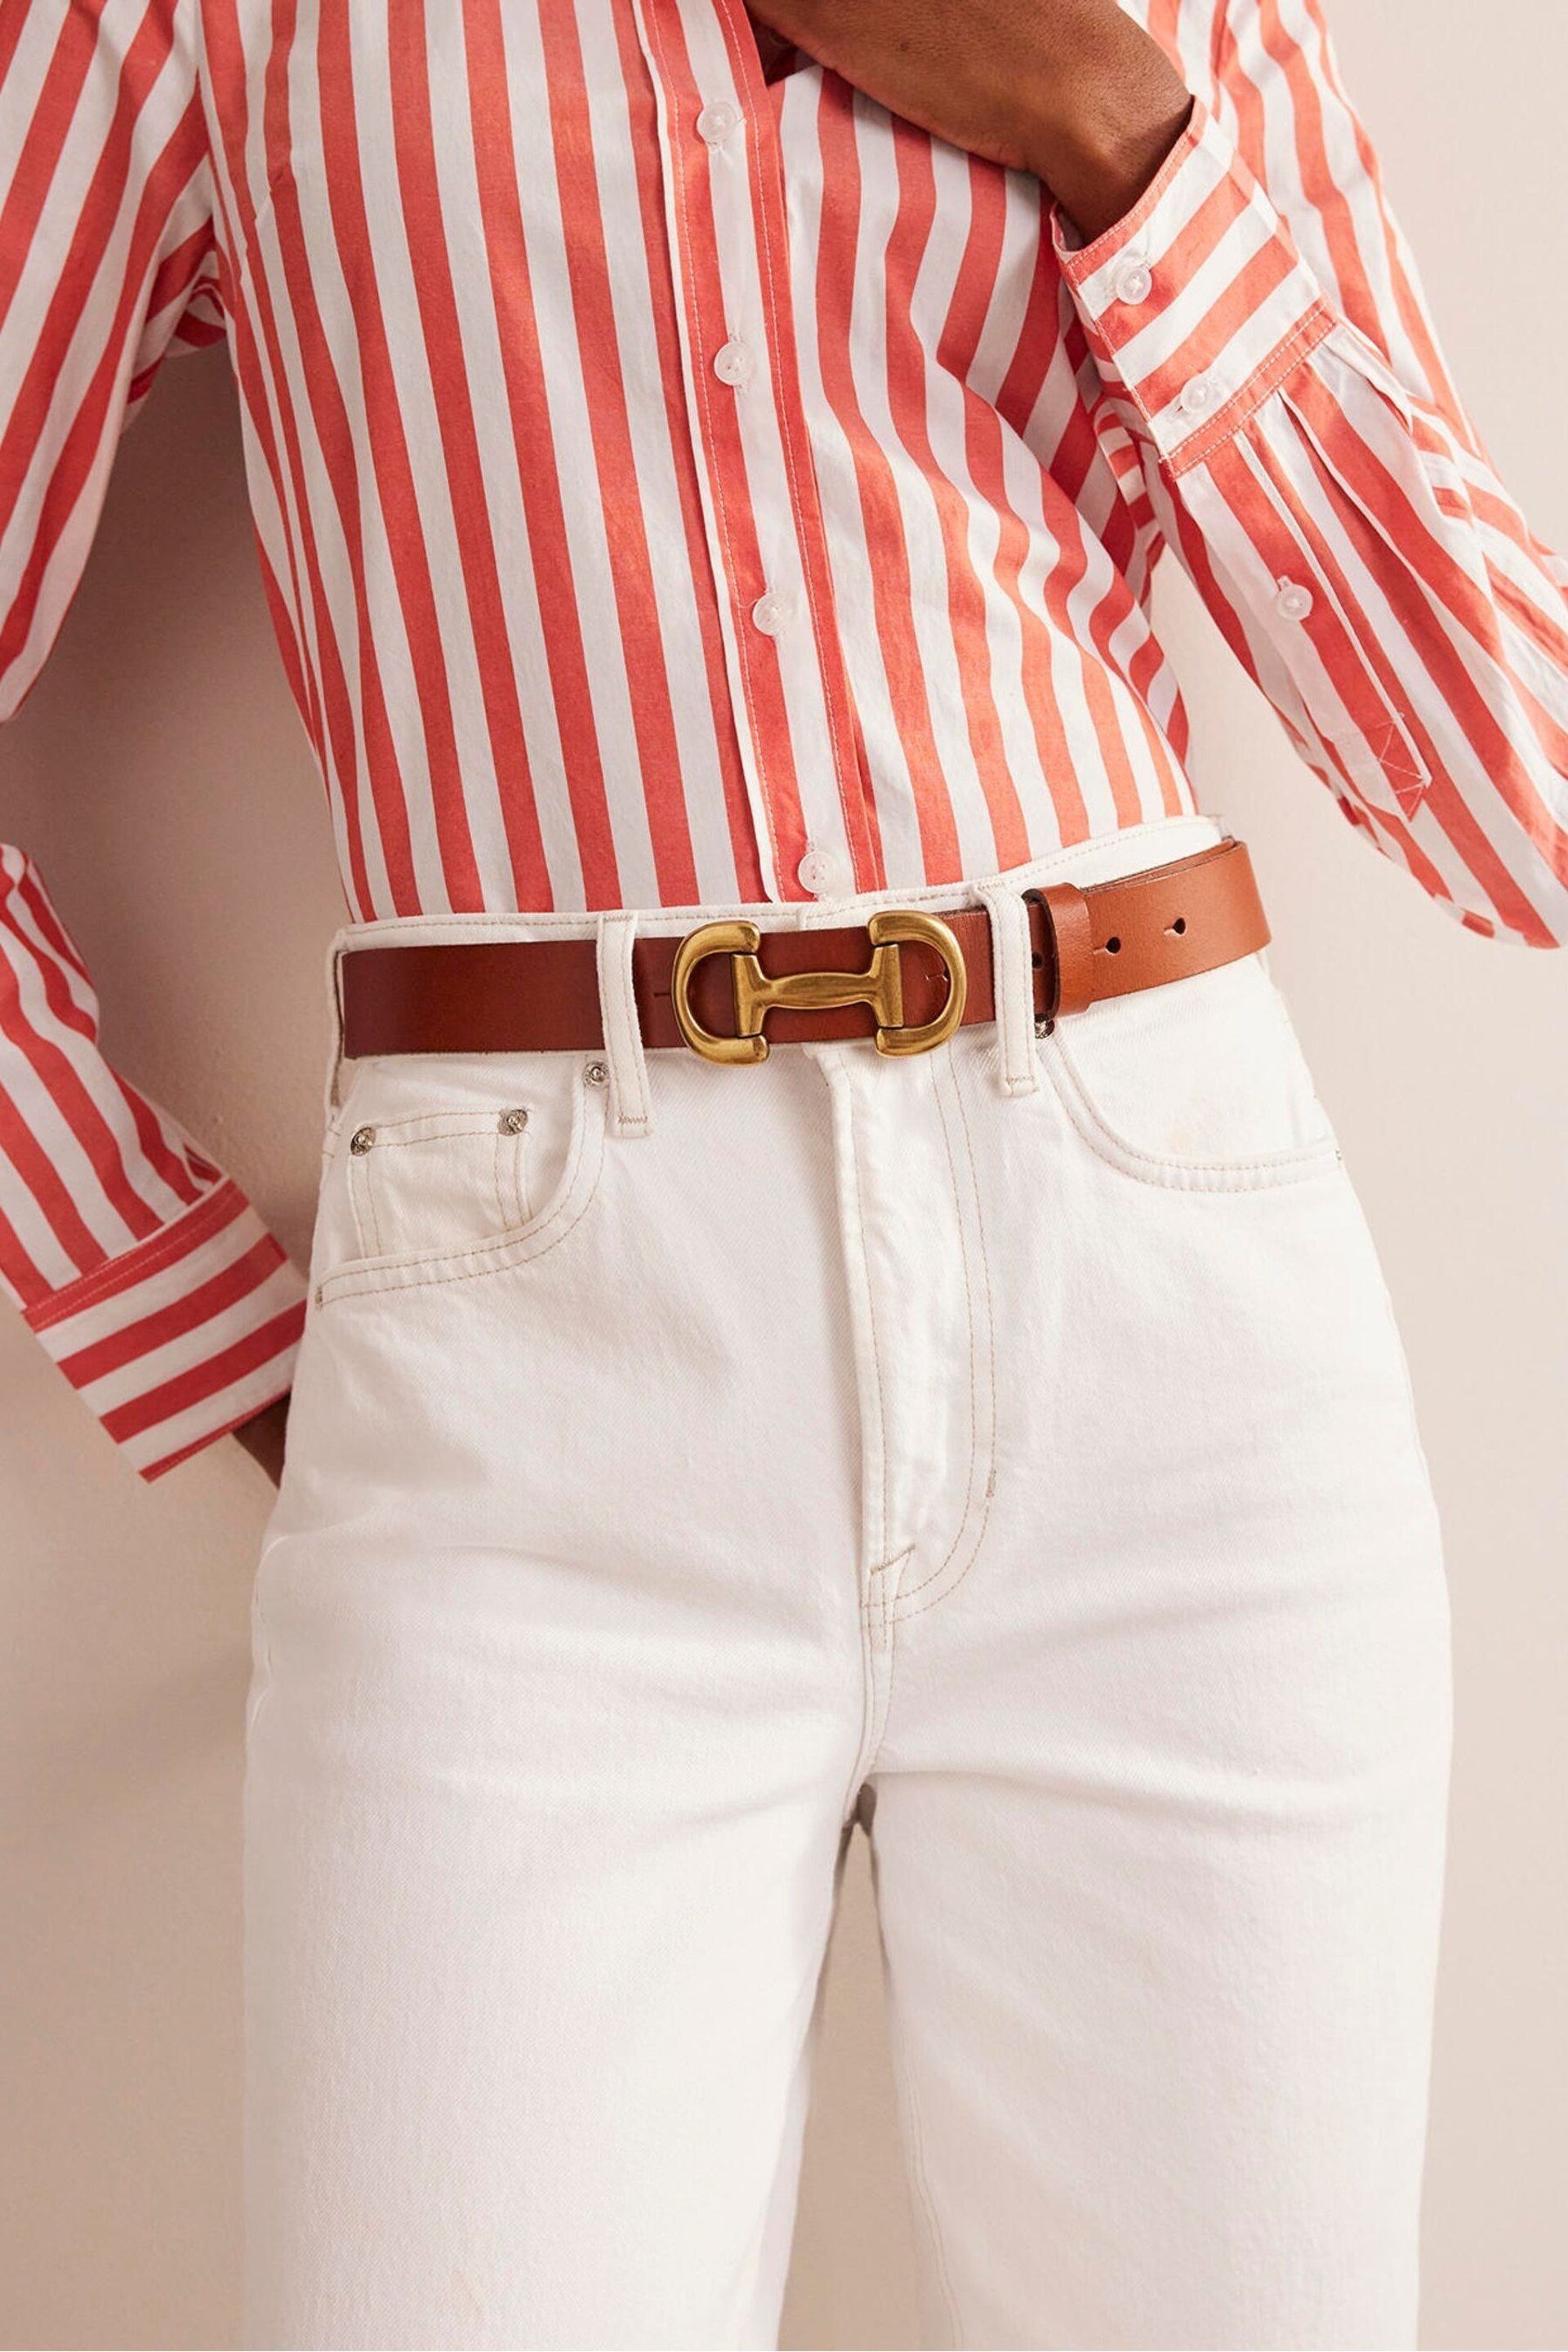 Boden Brown Iris Snaffle-Trim Leather Belt - Image 3 of 3